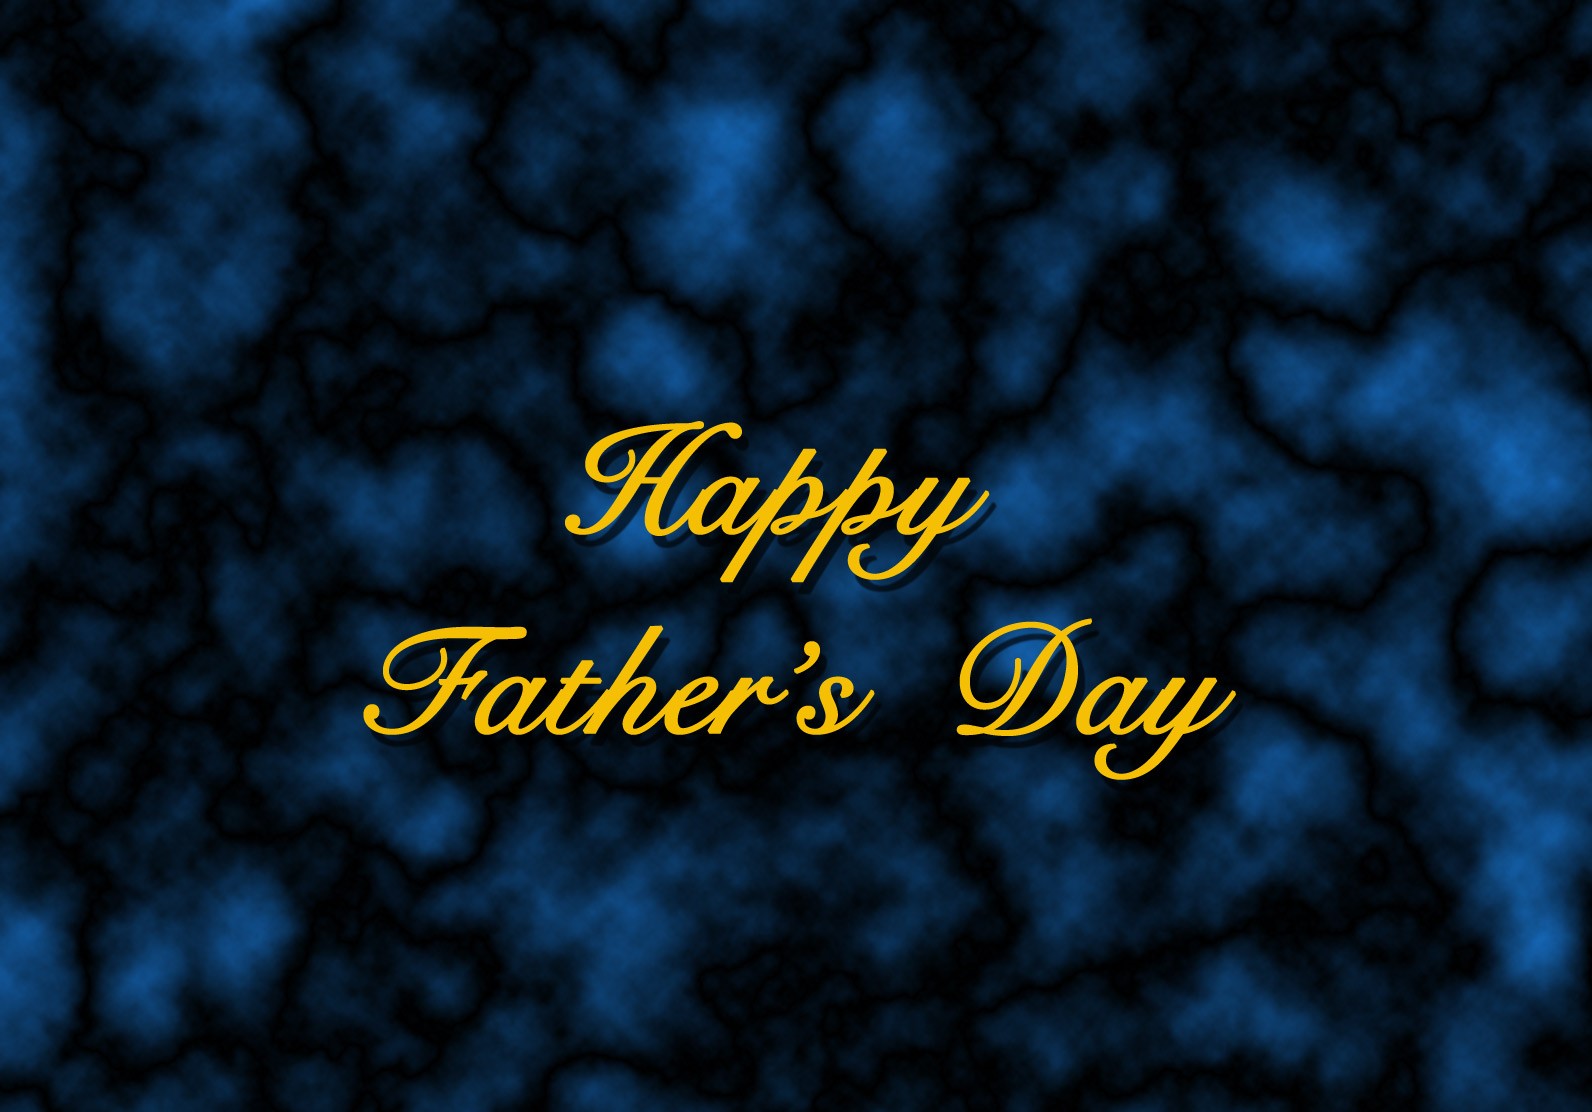 Happy Father's Day 2019 HD Images, Pictures, And Wallpapers For ...